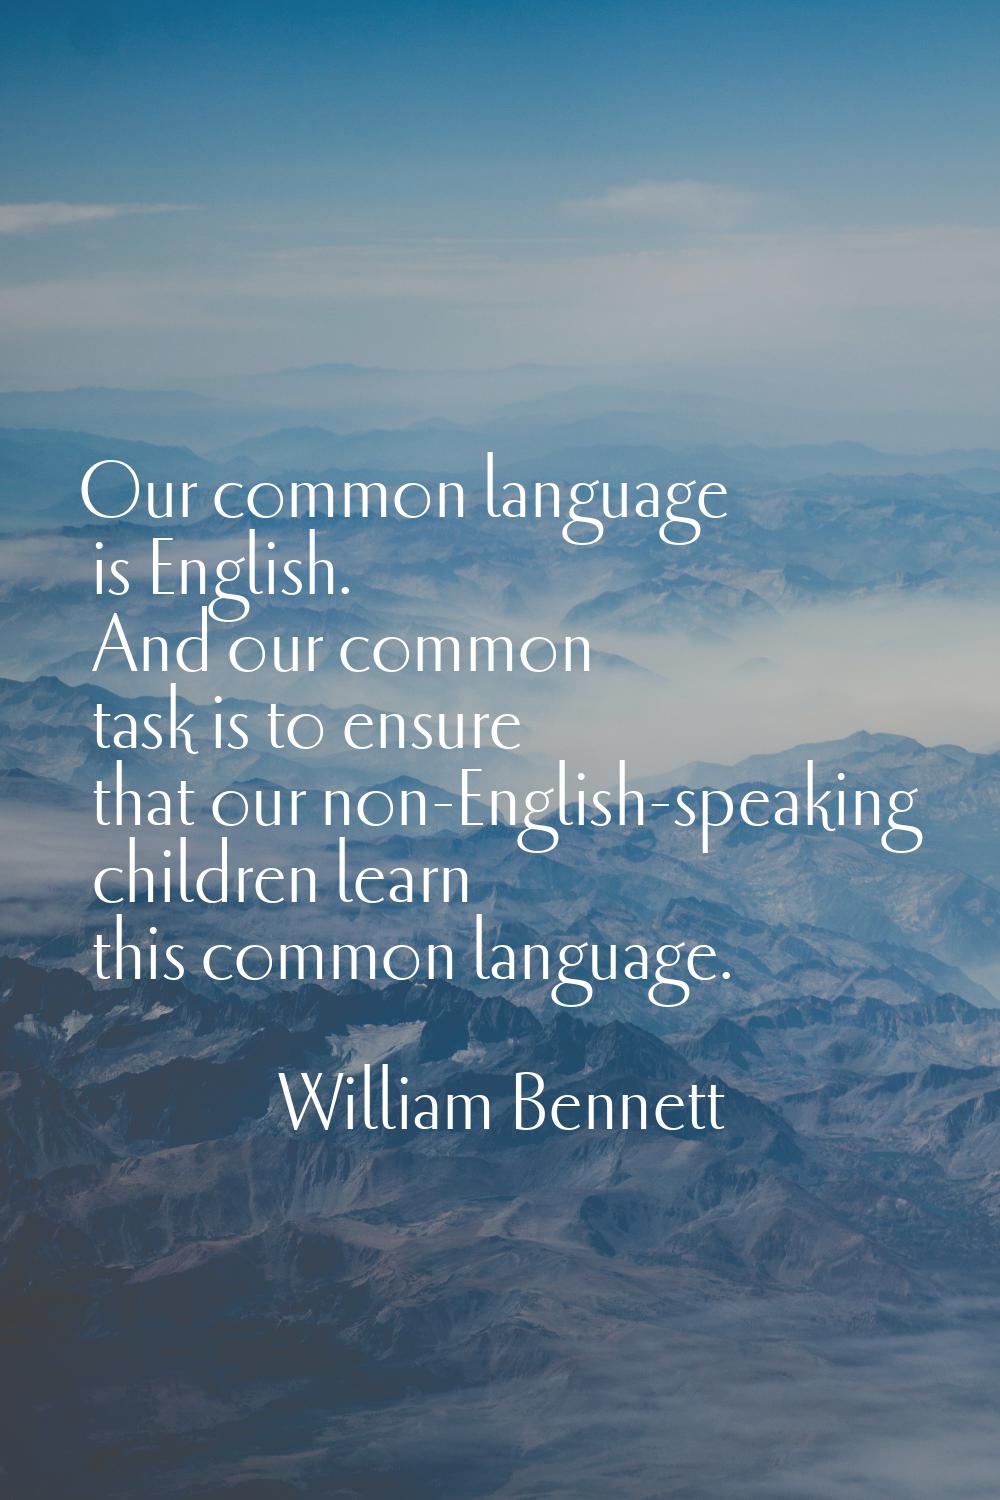 Our common language is English. And our common task is to ensure that our non-English-speaking chil